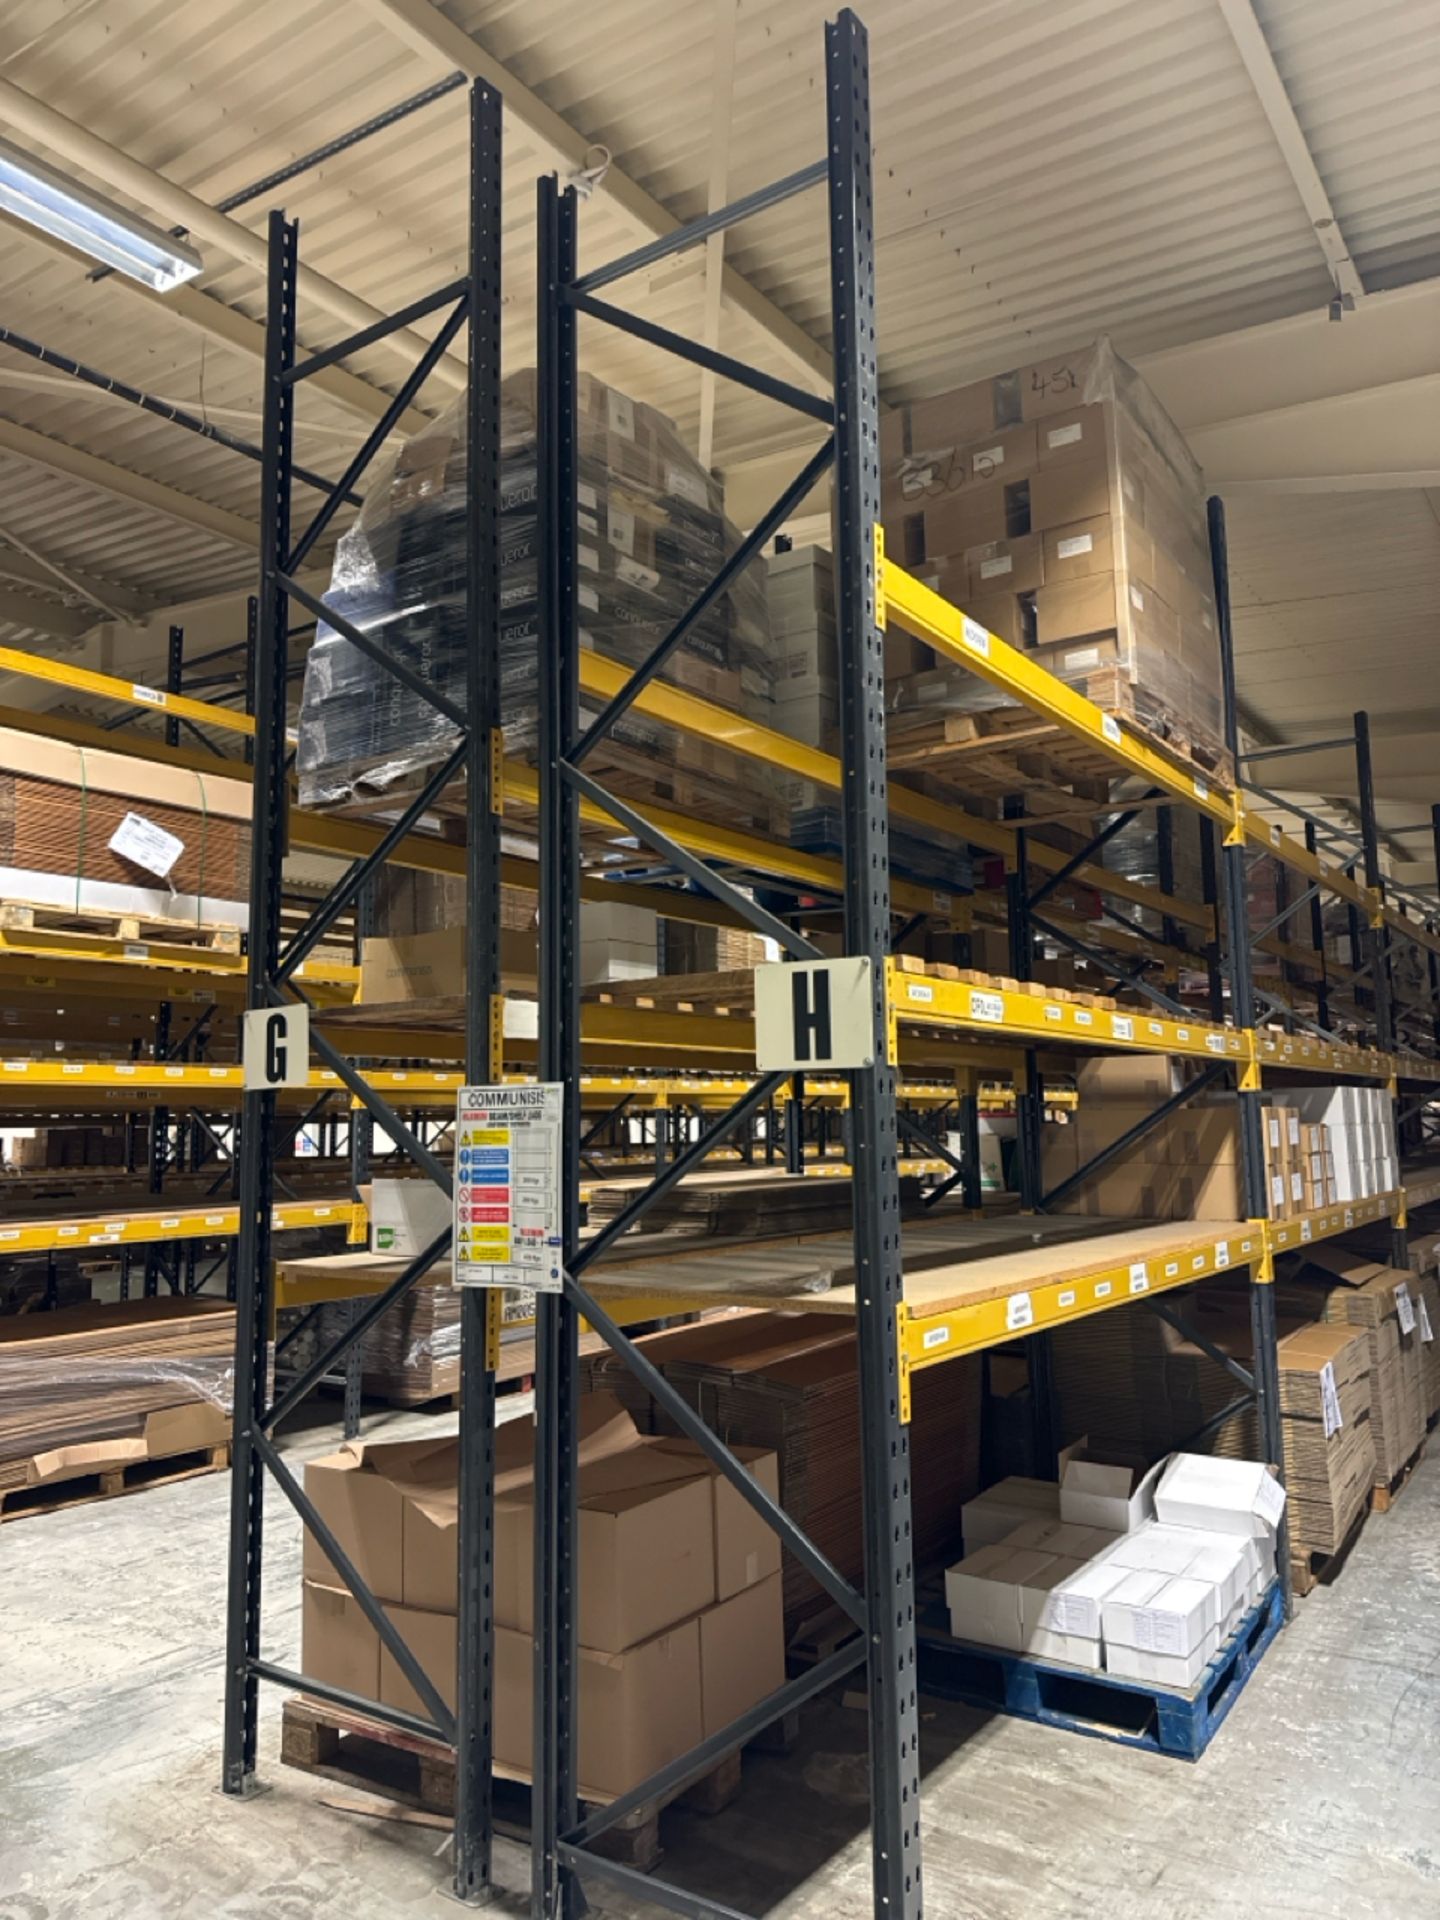 26 Bays Of Back To Back Boltless Industrial Pallet Racking - Image 3 of 8